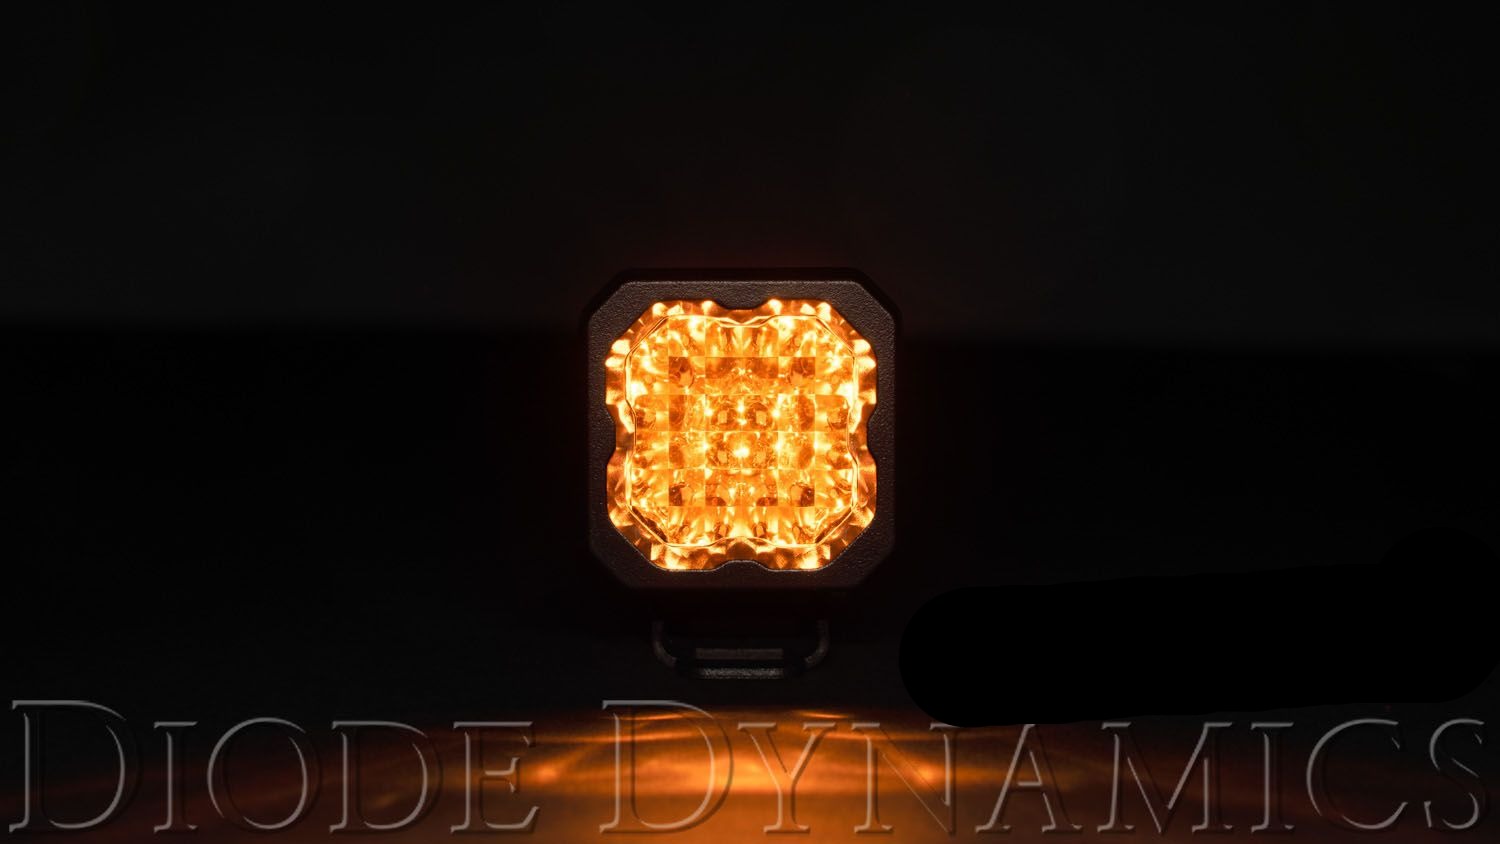 Diode Dynamics Stage Series C1 SSC1 Amber Flush Mount LED Pod (pair)